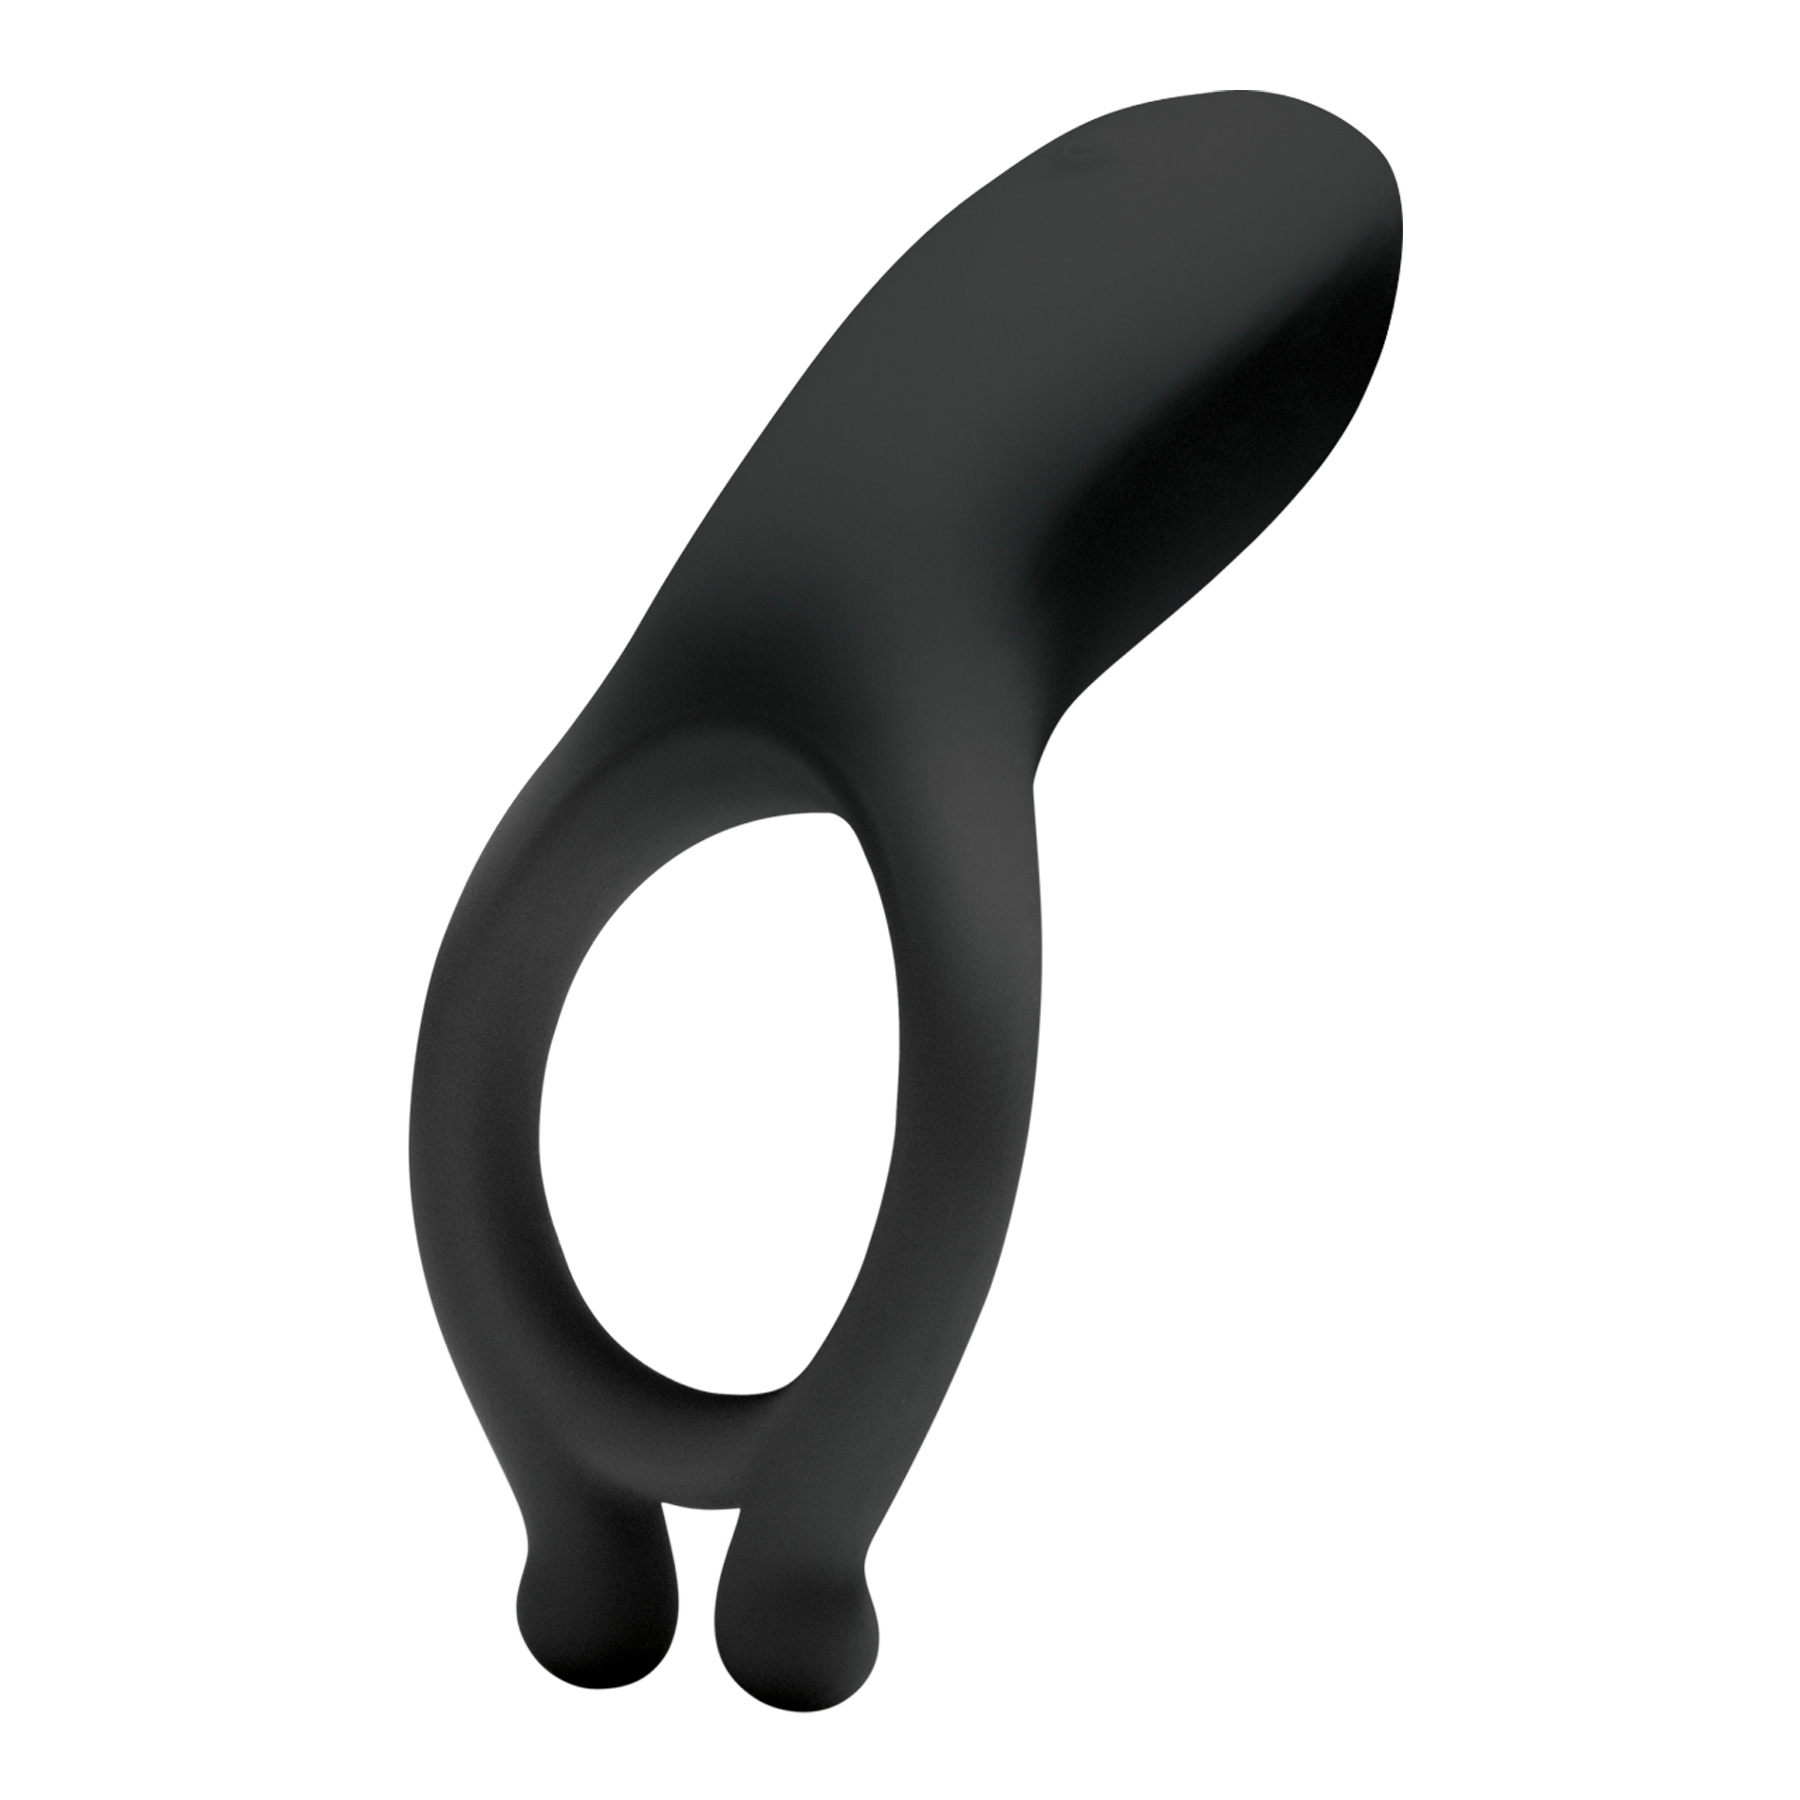 OptiMALE Rechargeable Vibrating C-Ring - Black - Thorn & Feather Sex Toy Canada